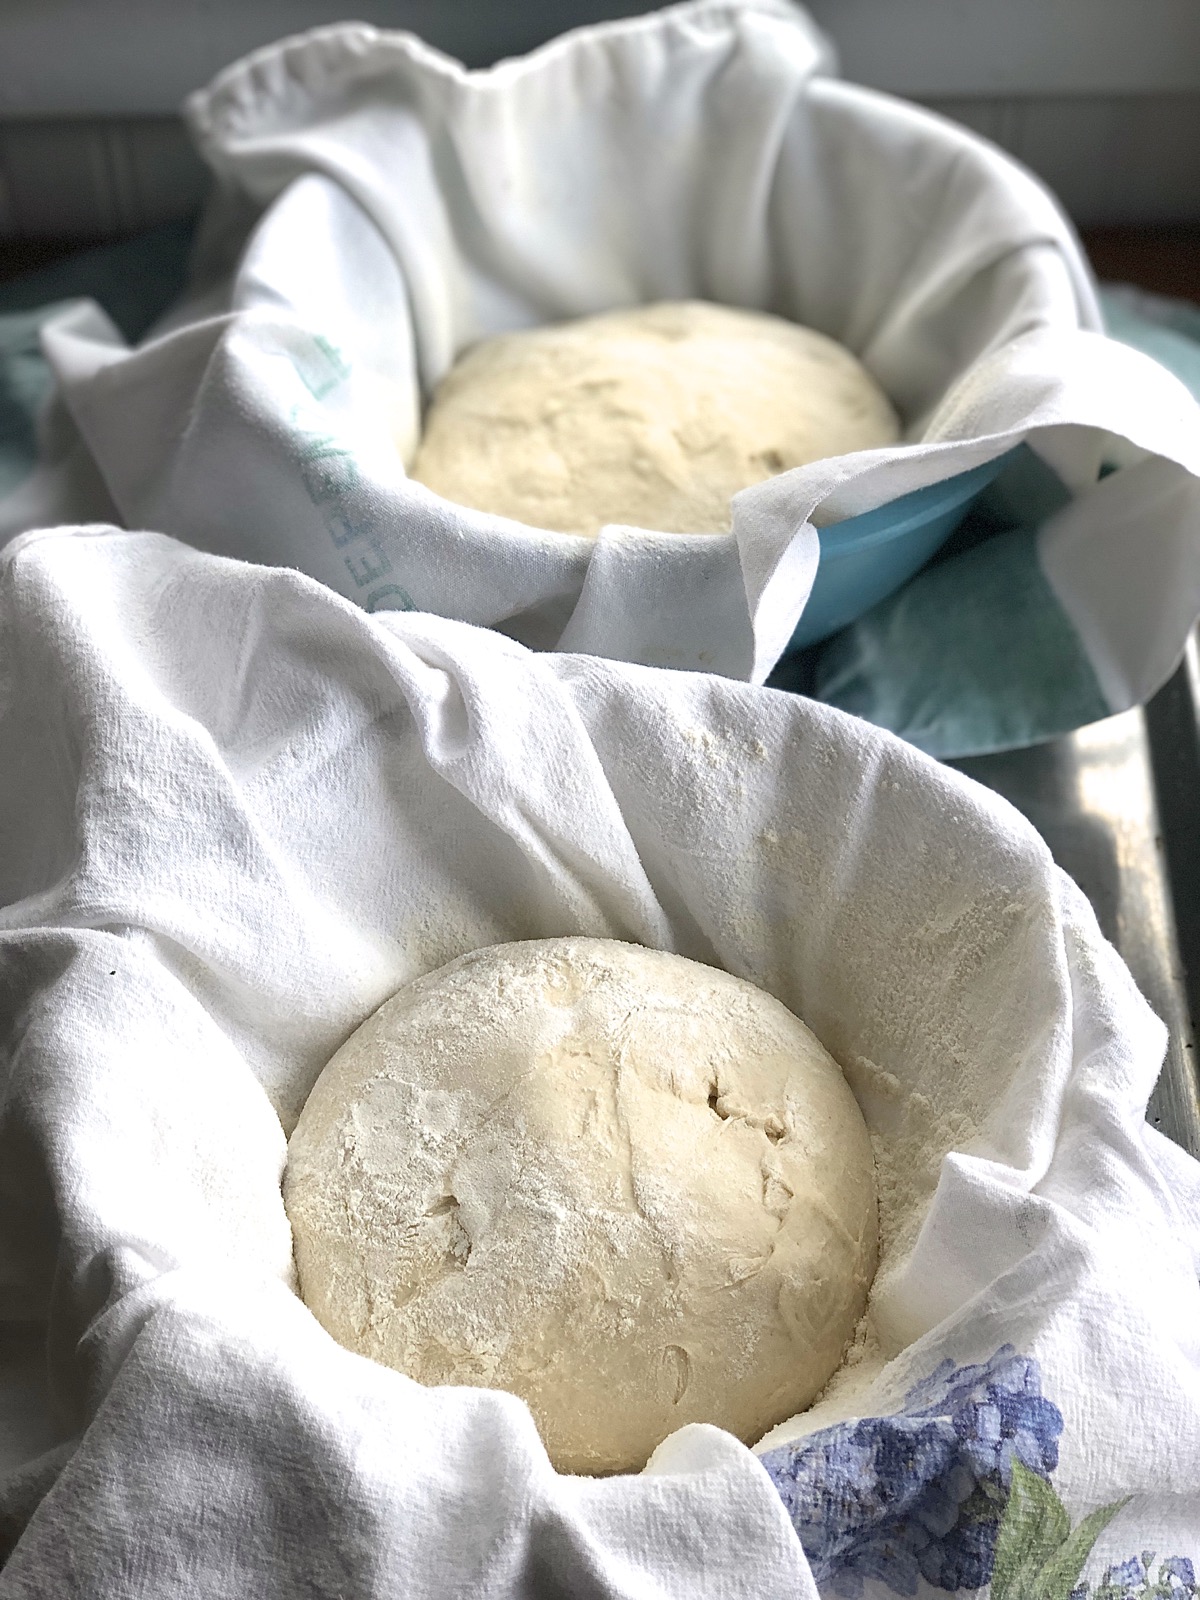 Shaped dough in a towel-lined bowl, ready to rise.